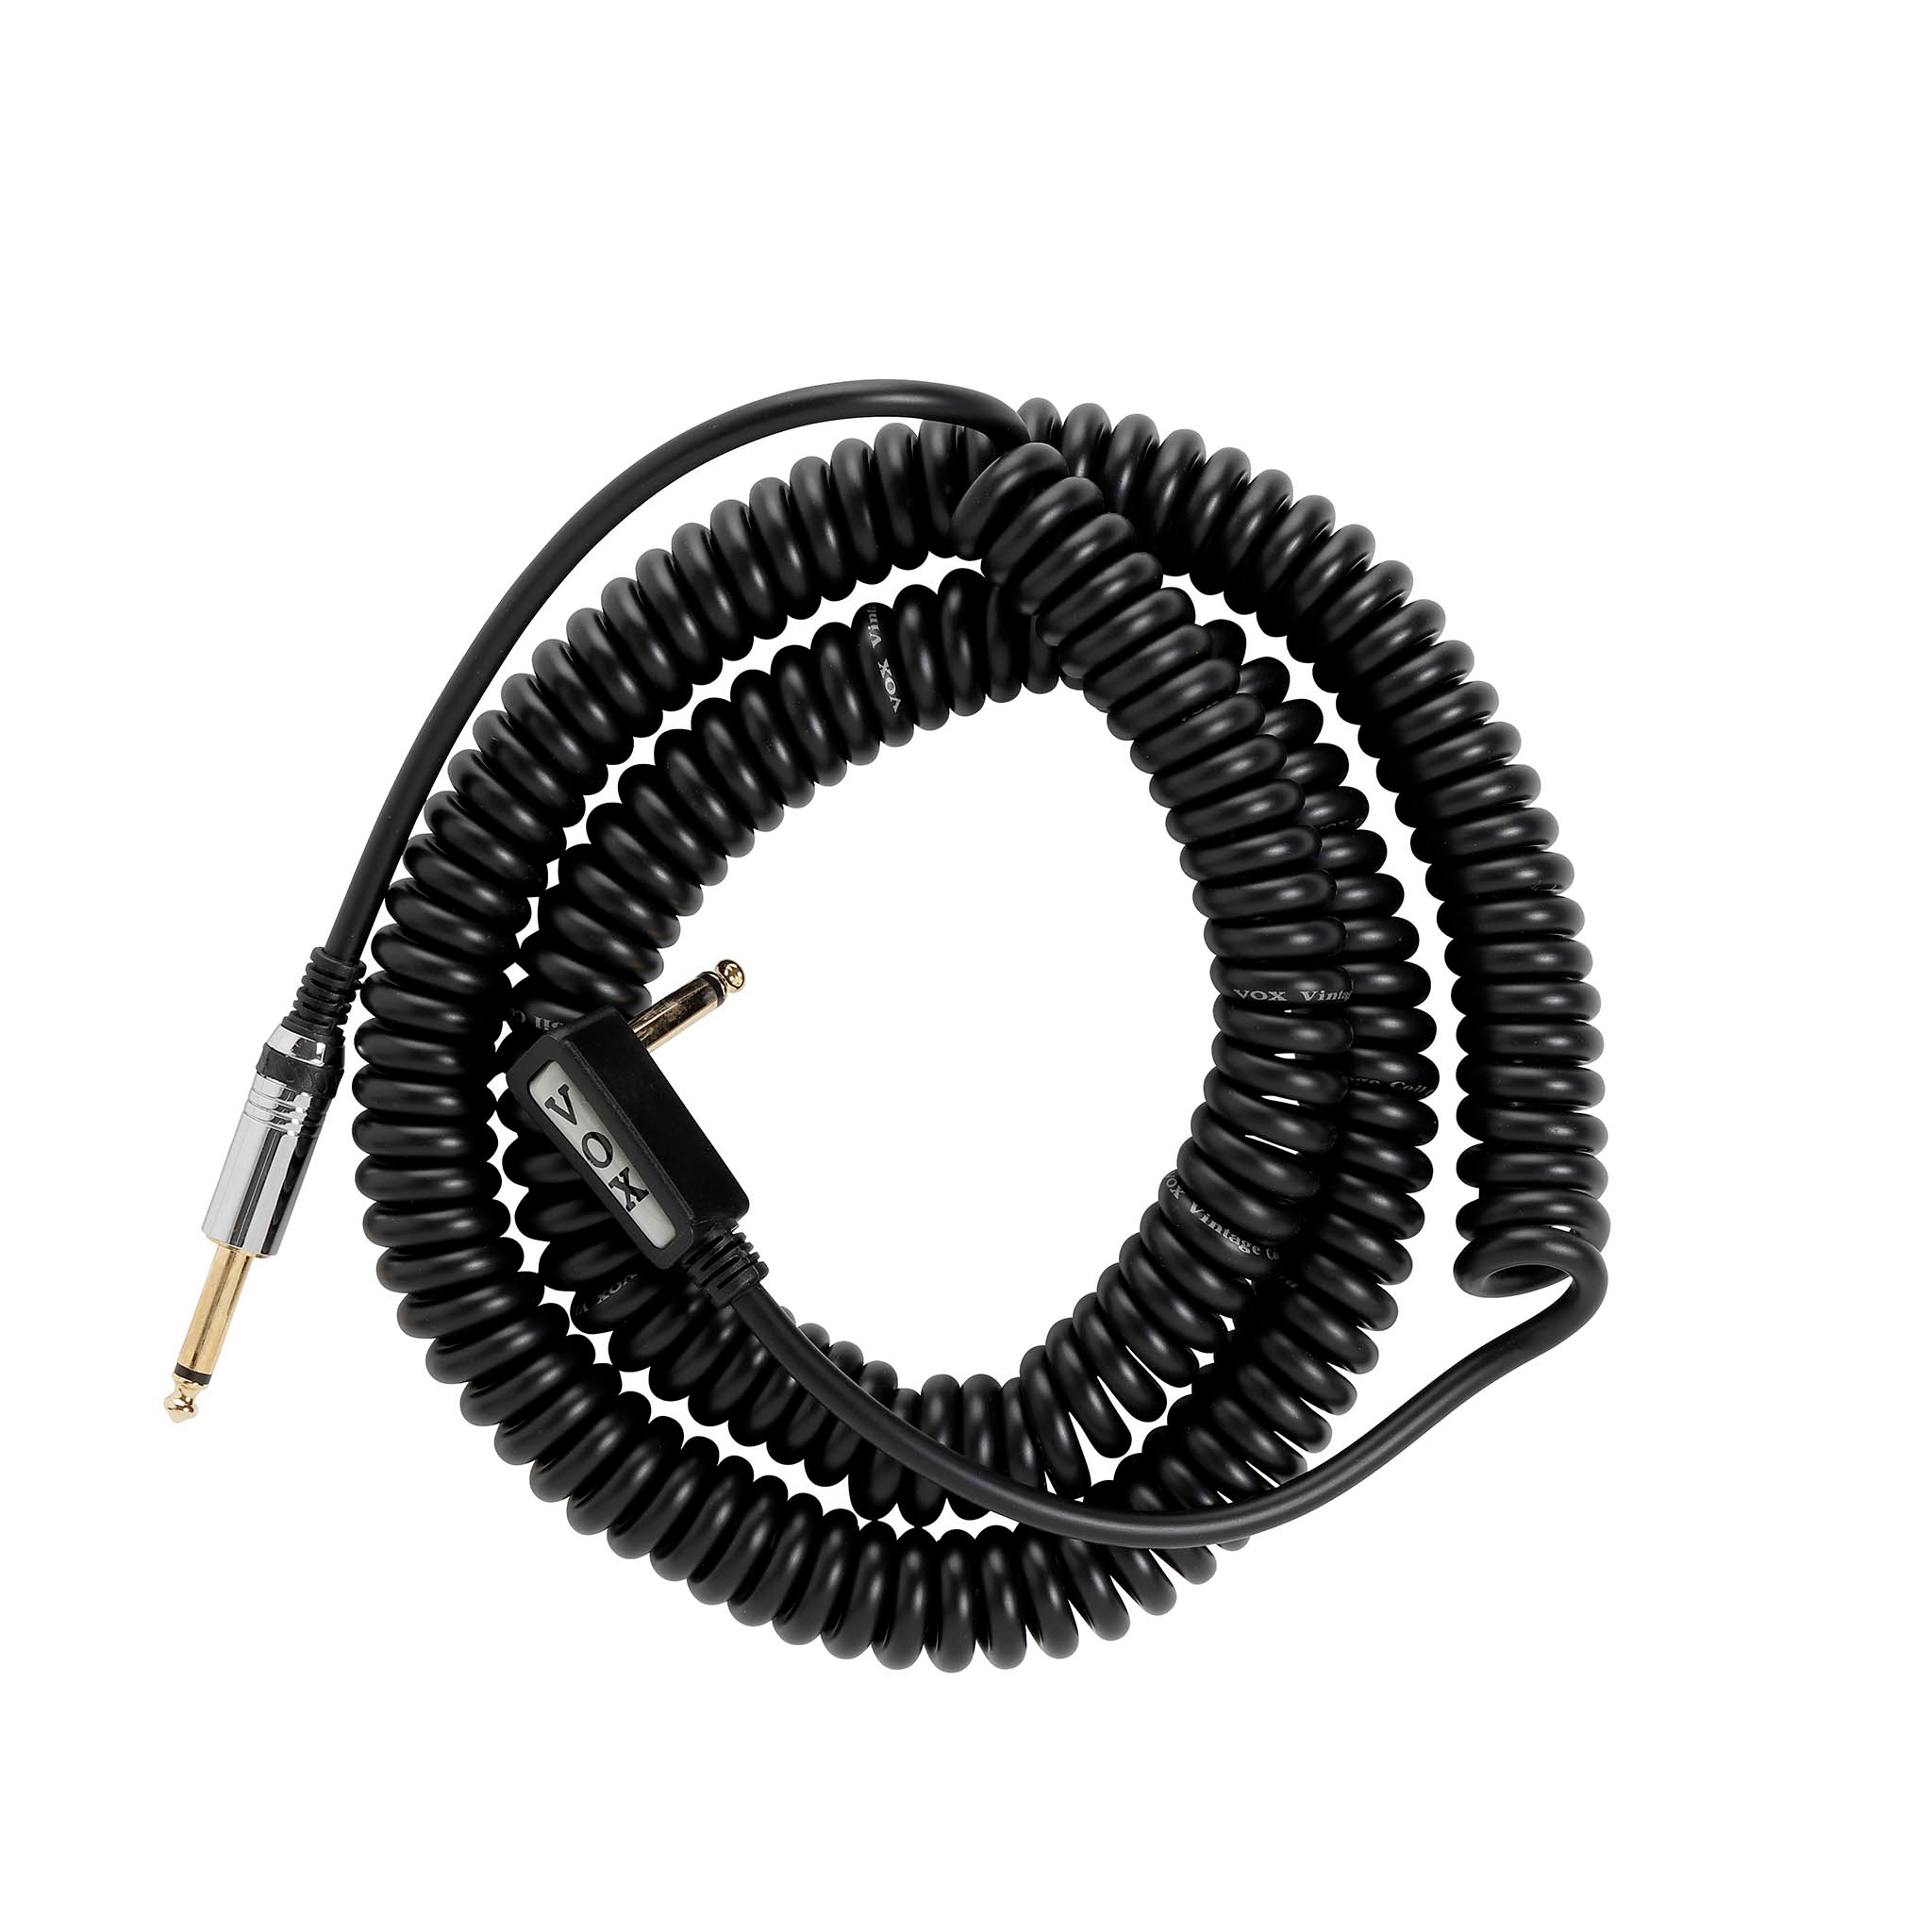 Vox Vintage Coiled Cable 1